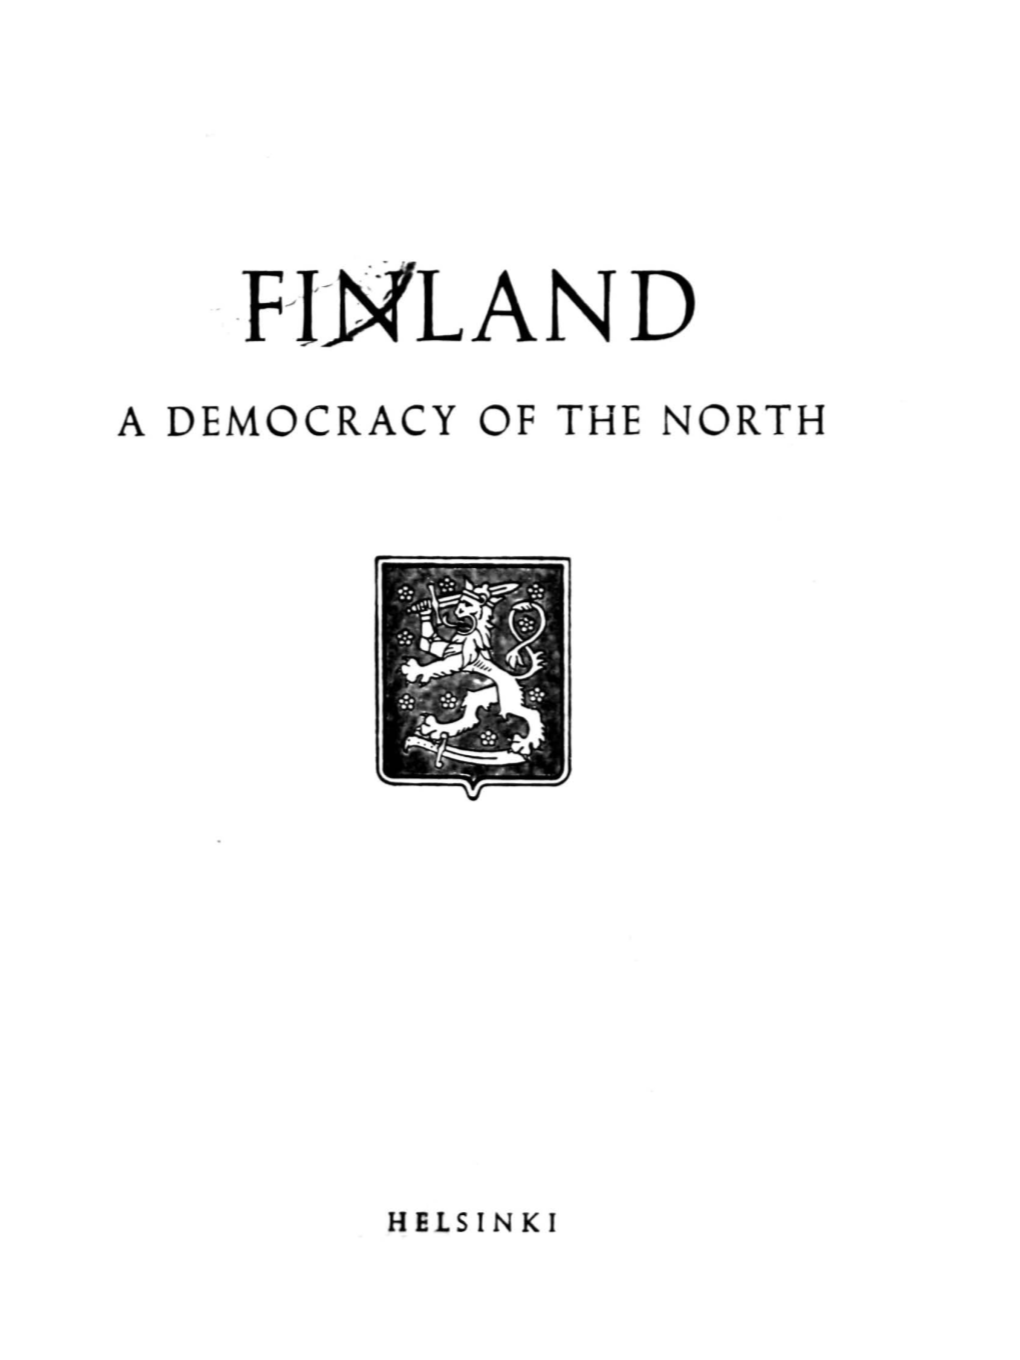 A Democracy of the North